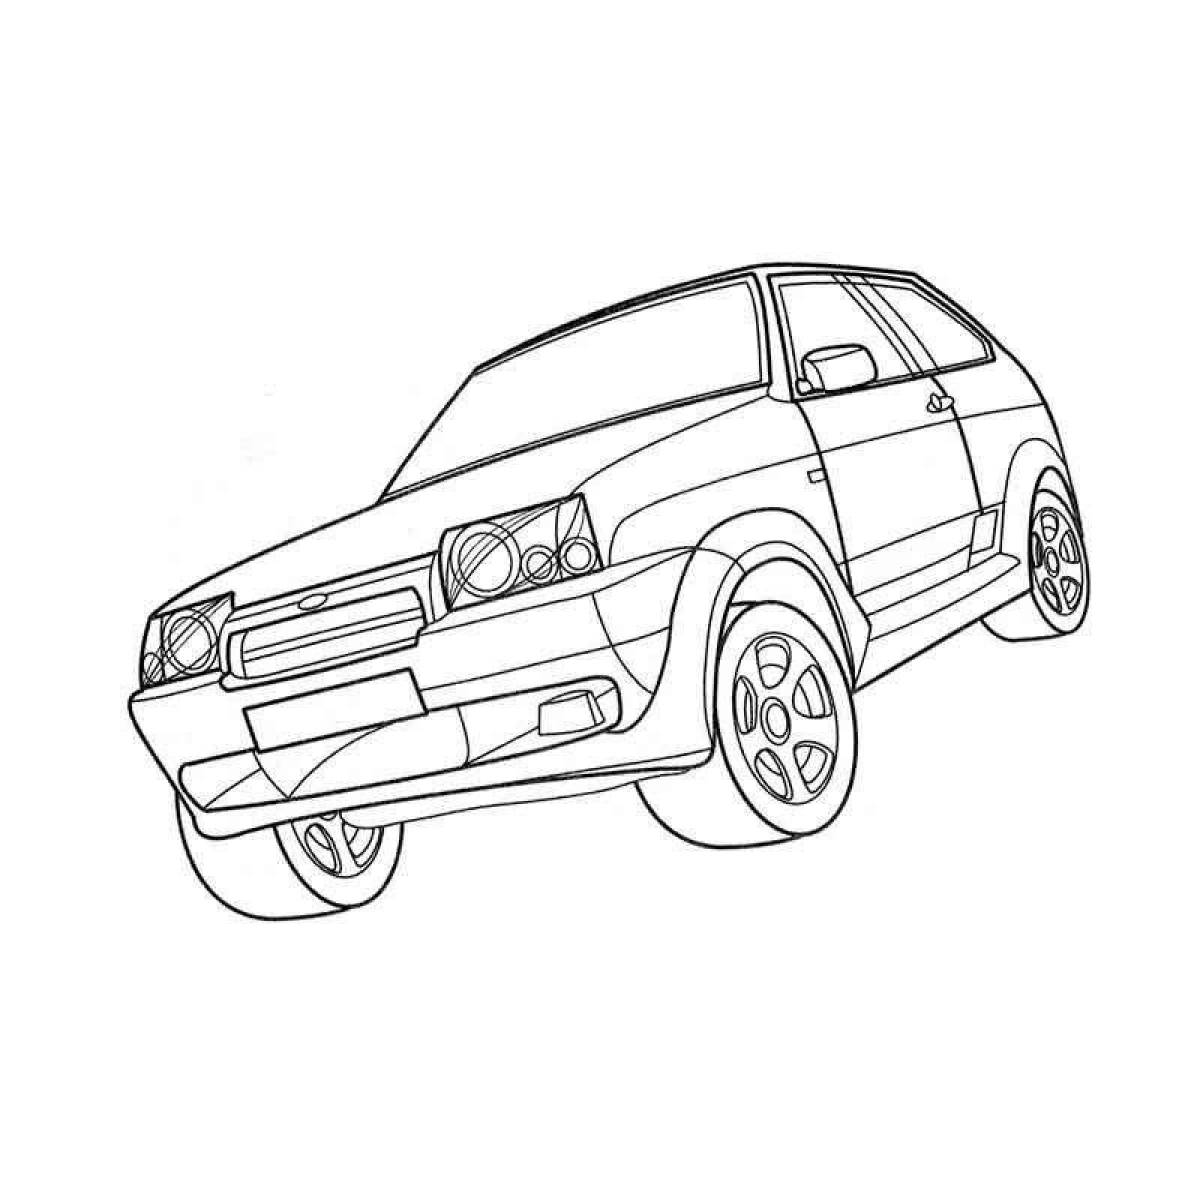 Colourful lada cars coloring page